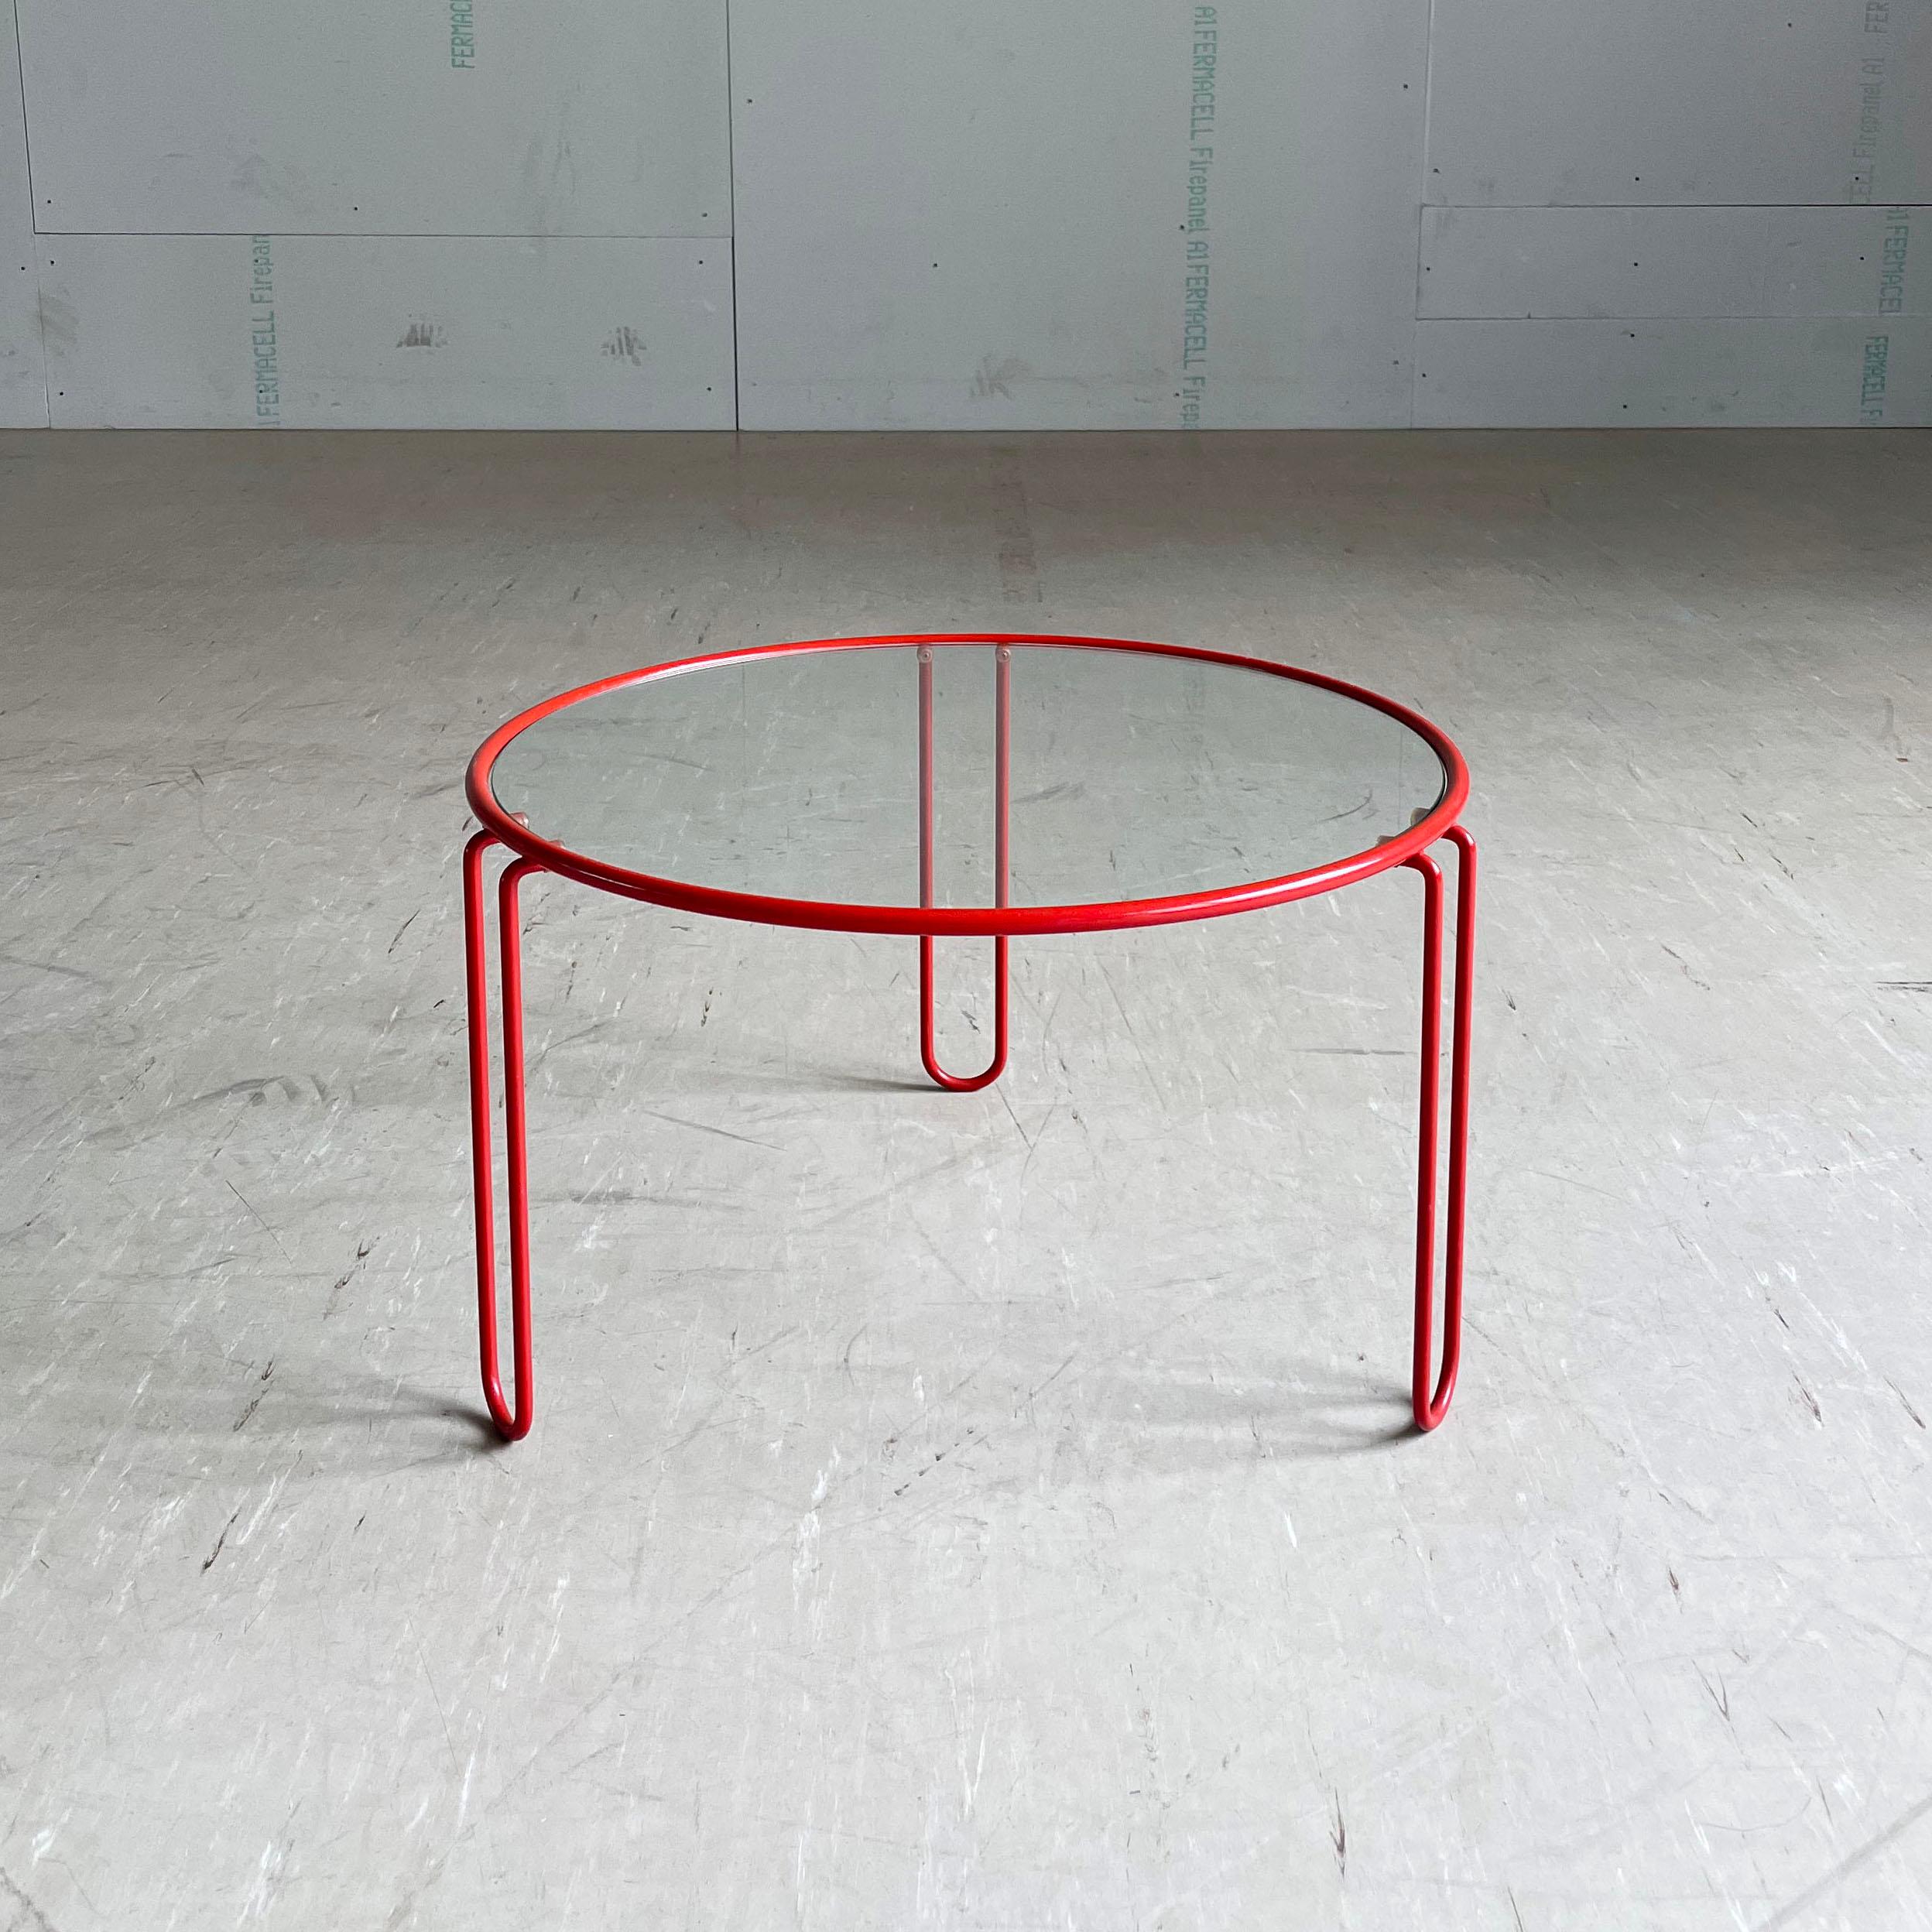 Stylish 1970's Italian Coffee / Side Table. Red metal frame with clear glass tabletop. 